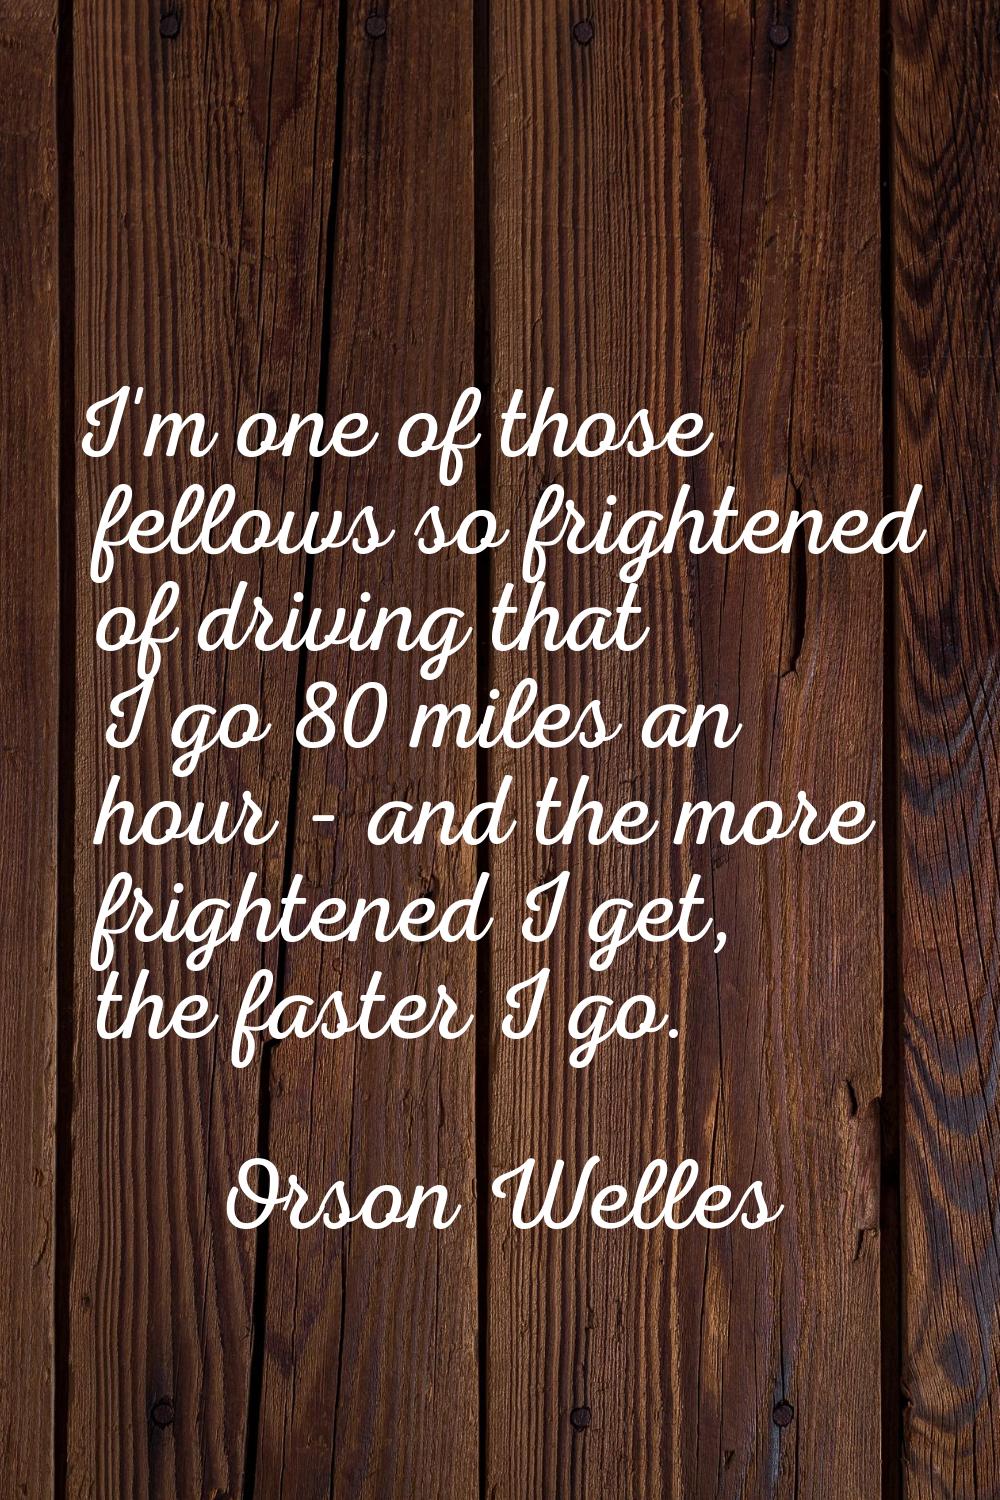 I'm one of those fellows so frightened of driving that I go 80 miles an hour - and the more frighte